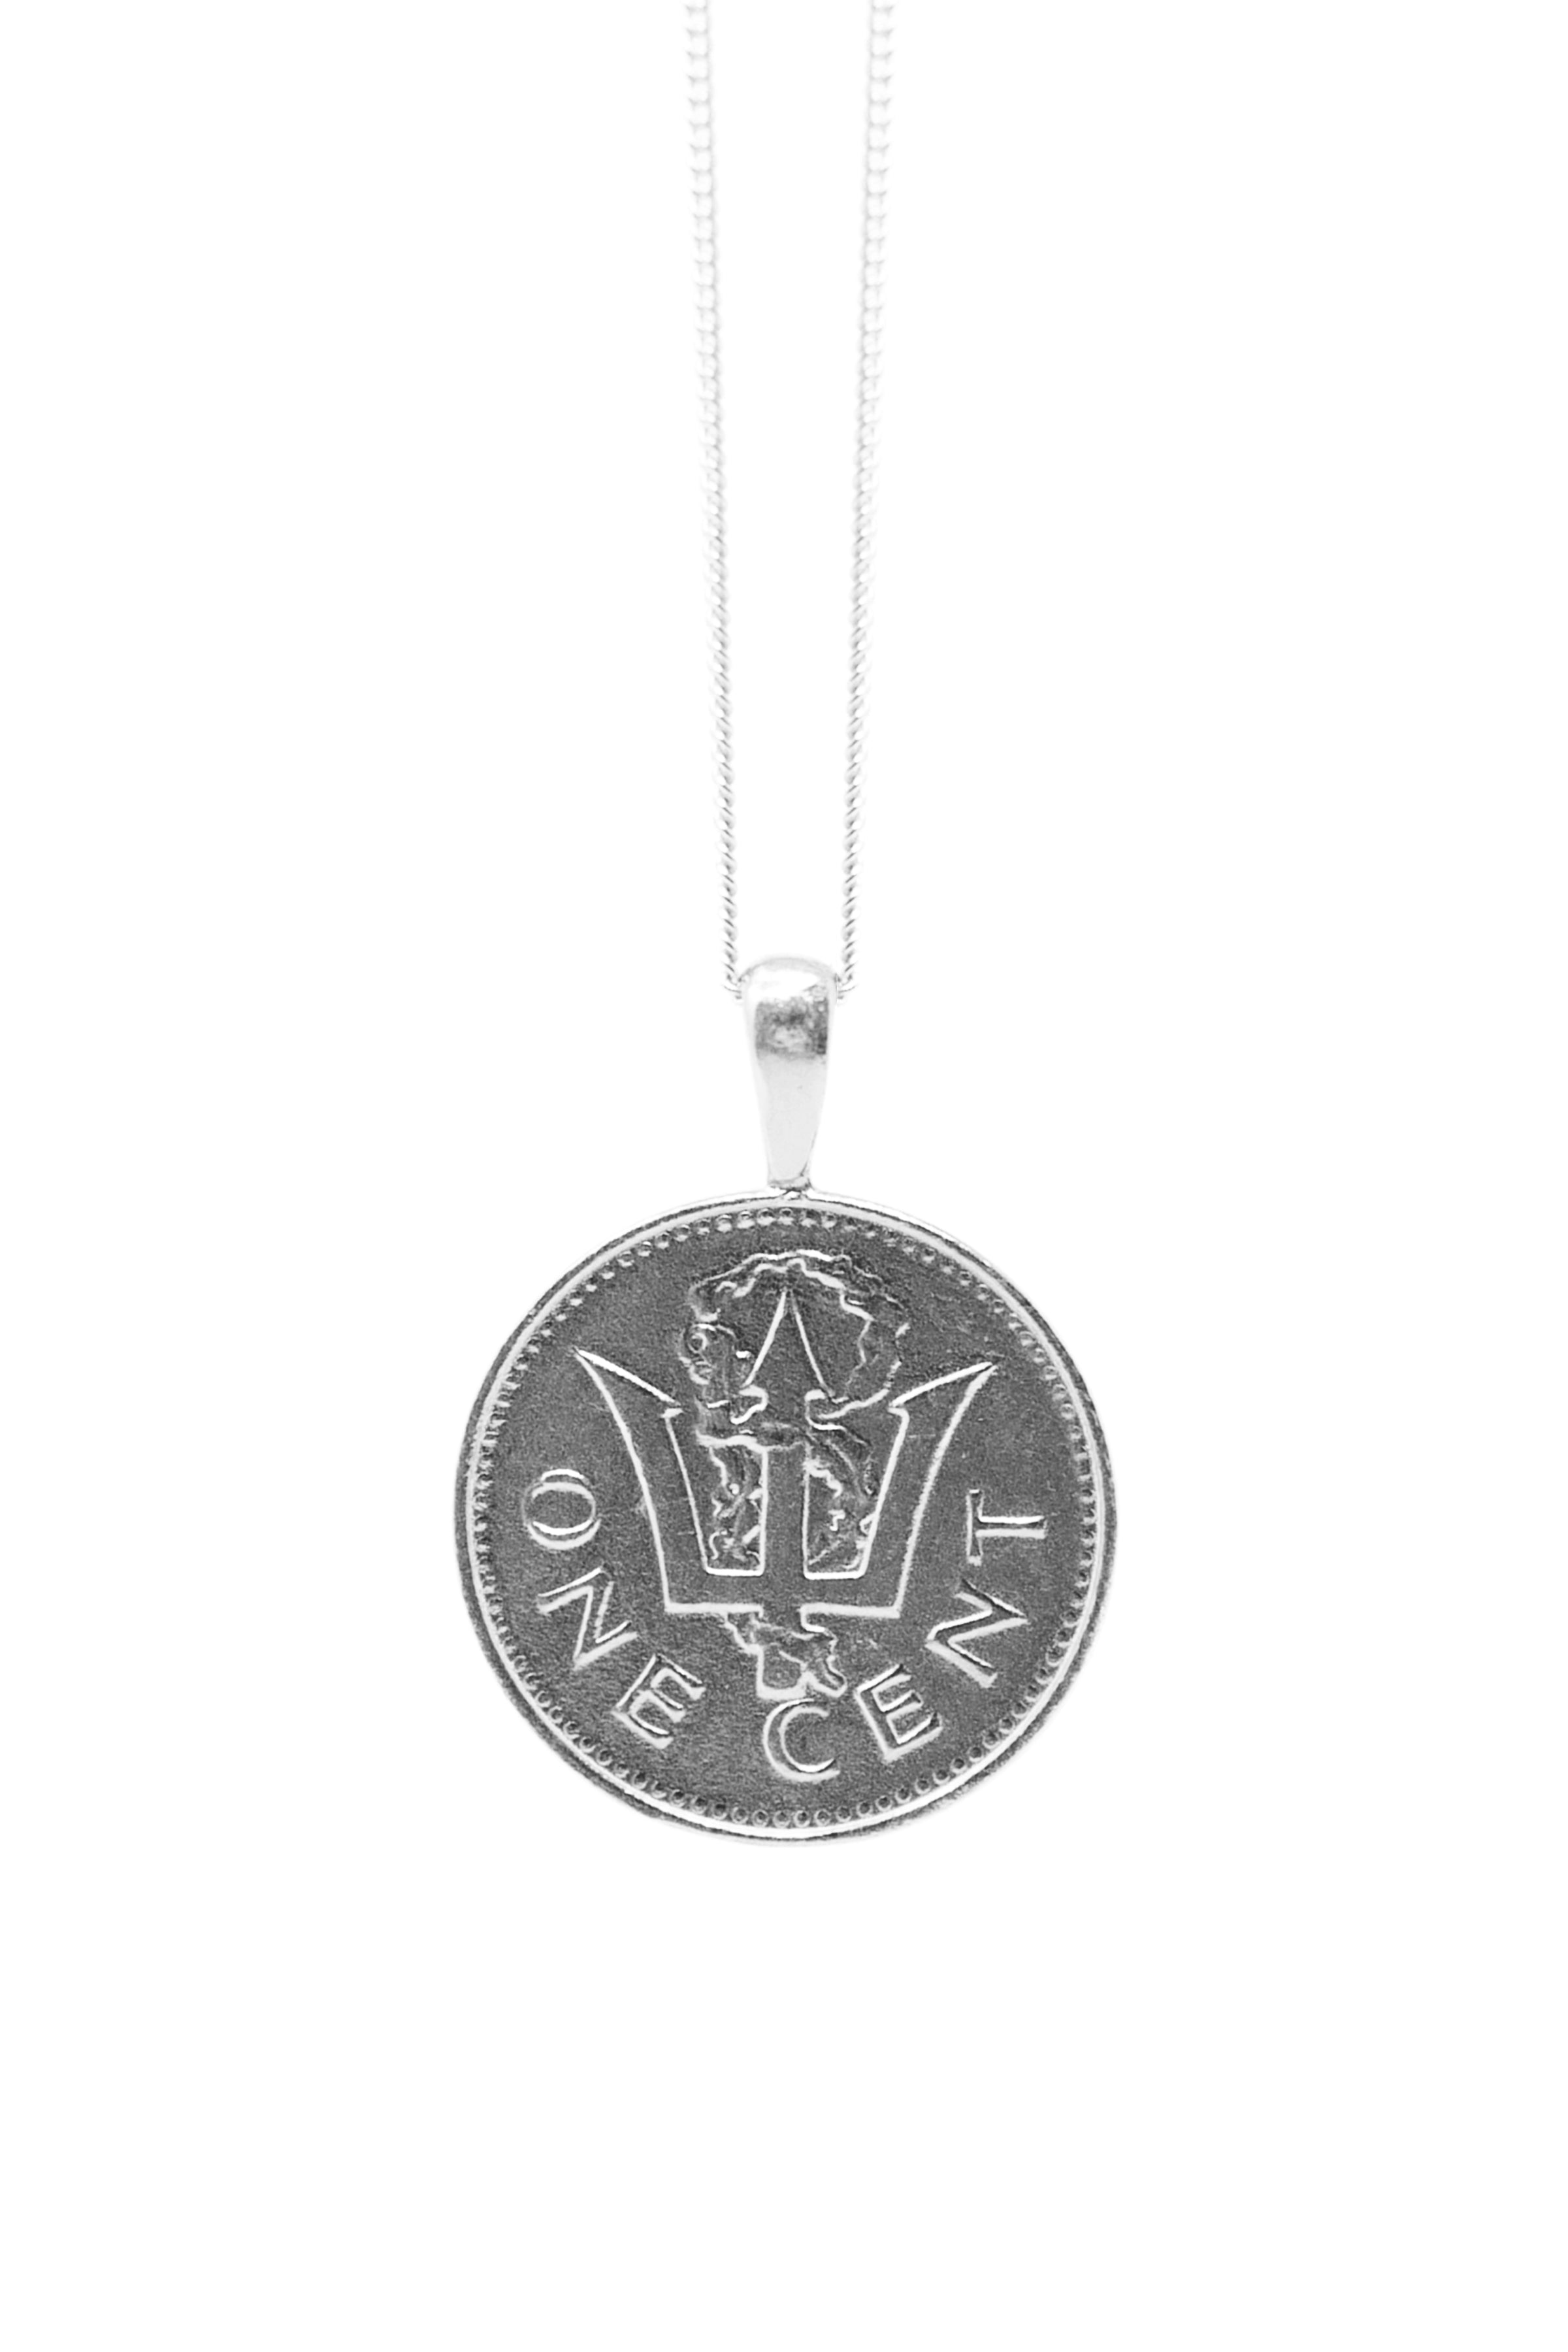 THE BRAZIL Coin Necklace – omiwoods